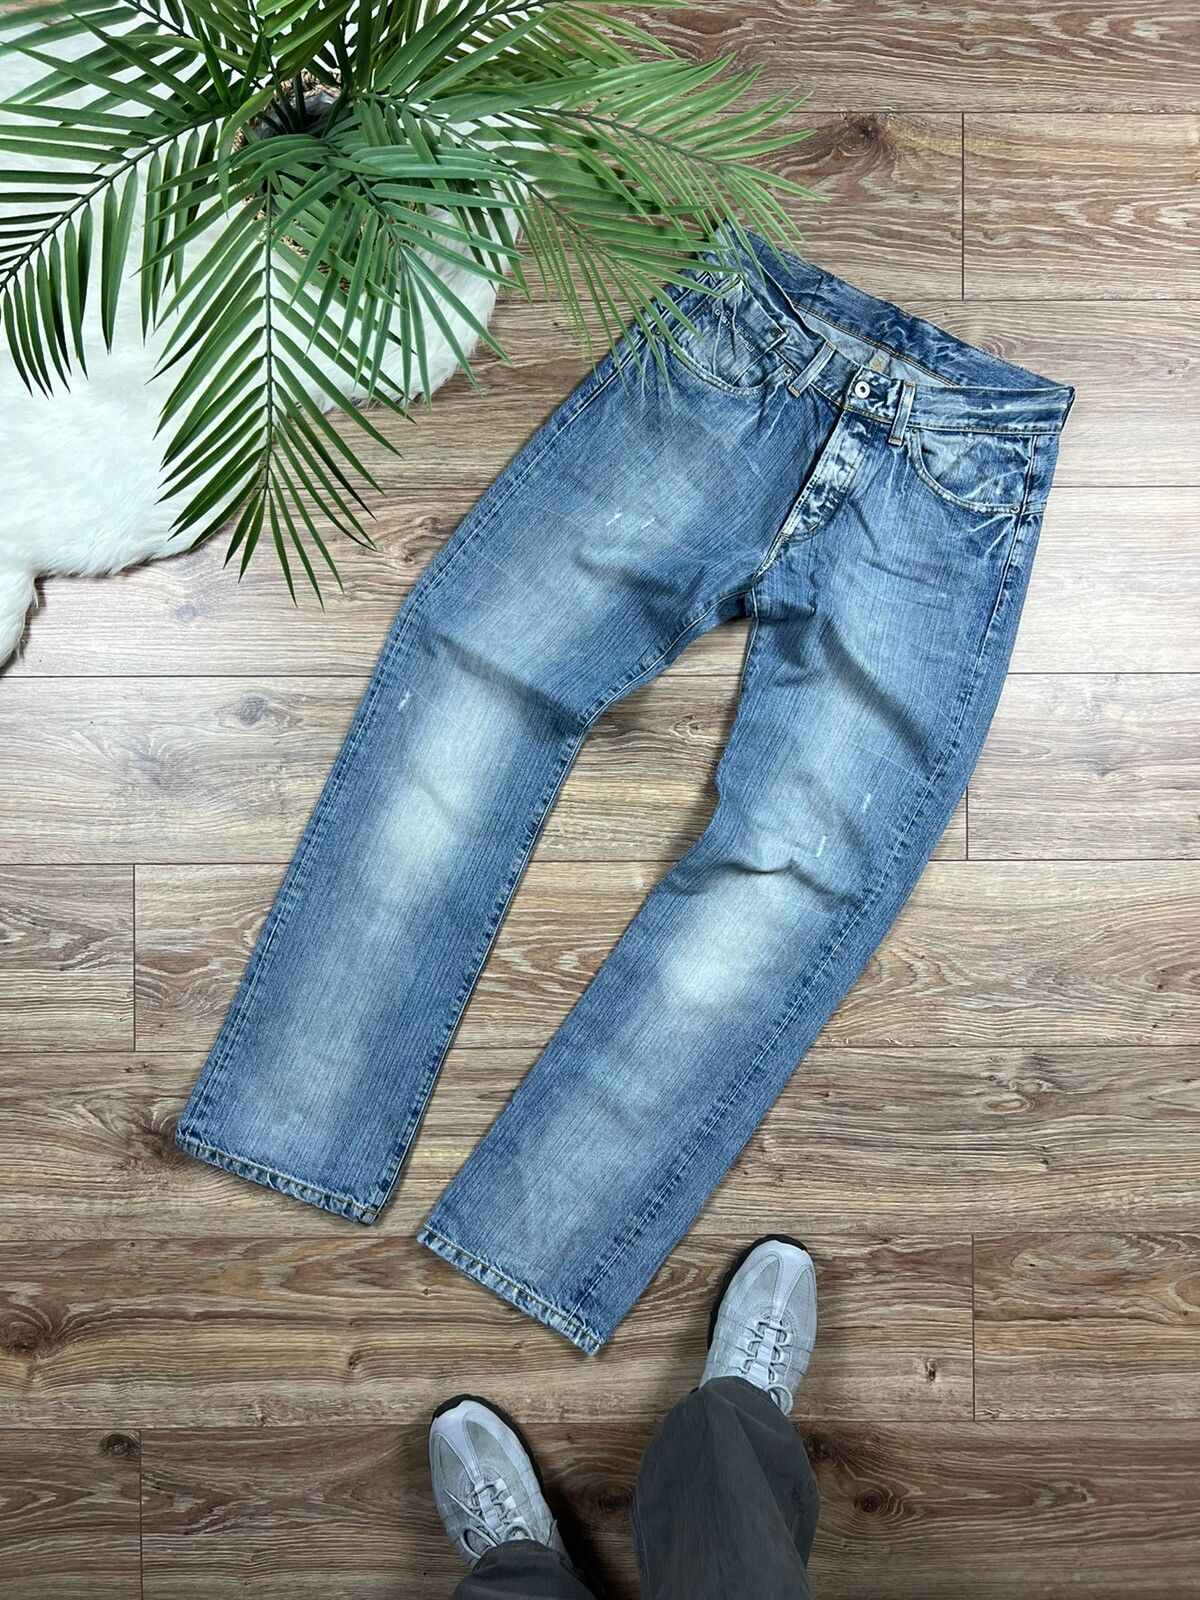 Vintage 💎 90’S G-STAR RAW VINTAGE AVANT GARDE WASHED STRAIGHT JEANS Size US 31 - 2 Preview